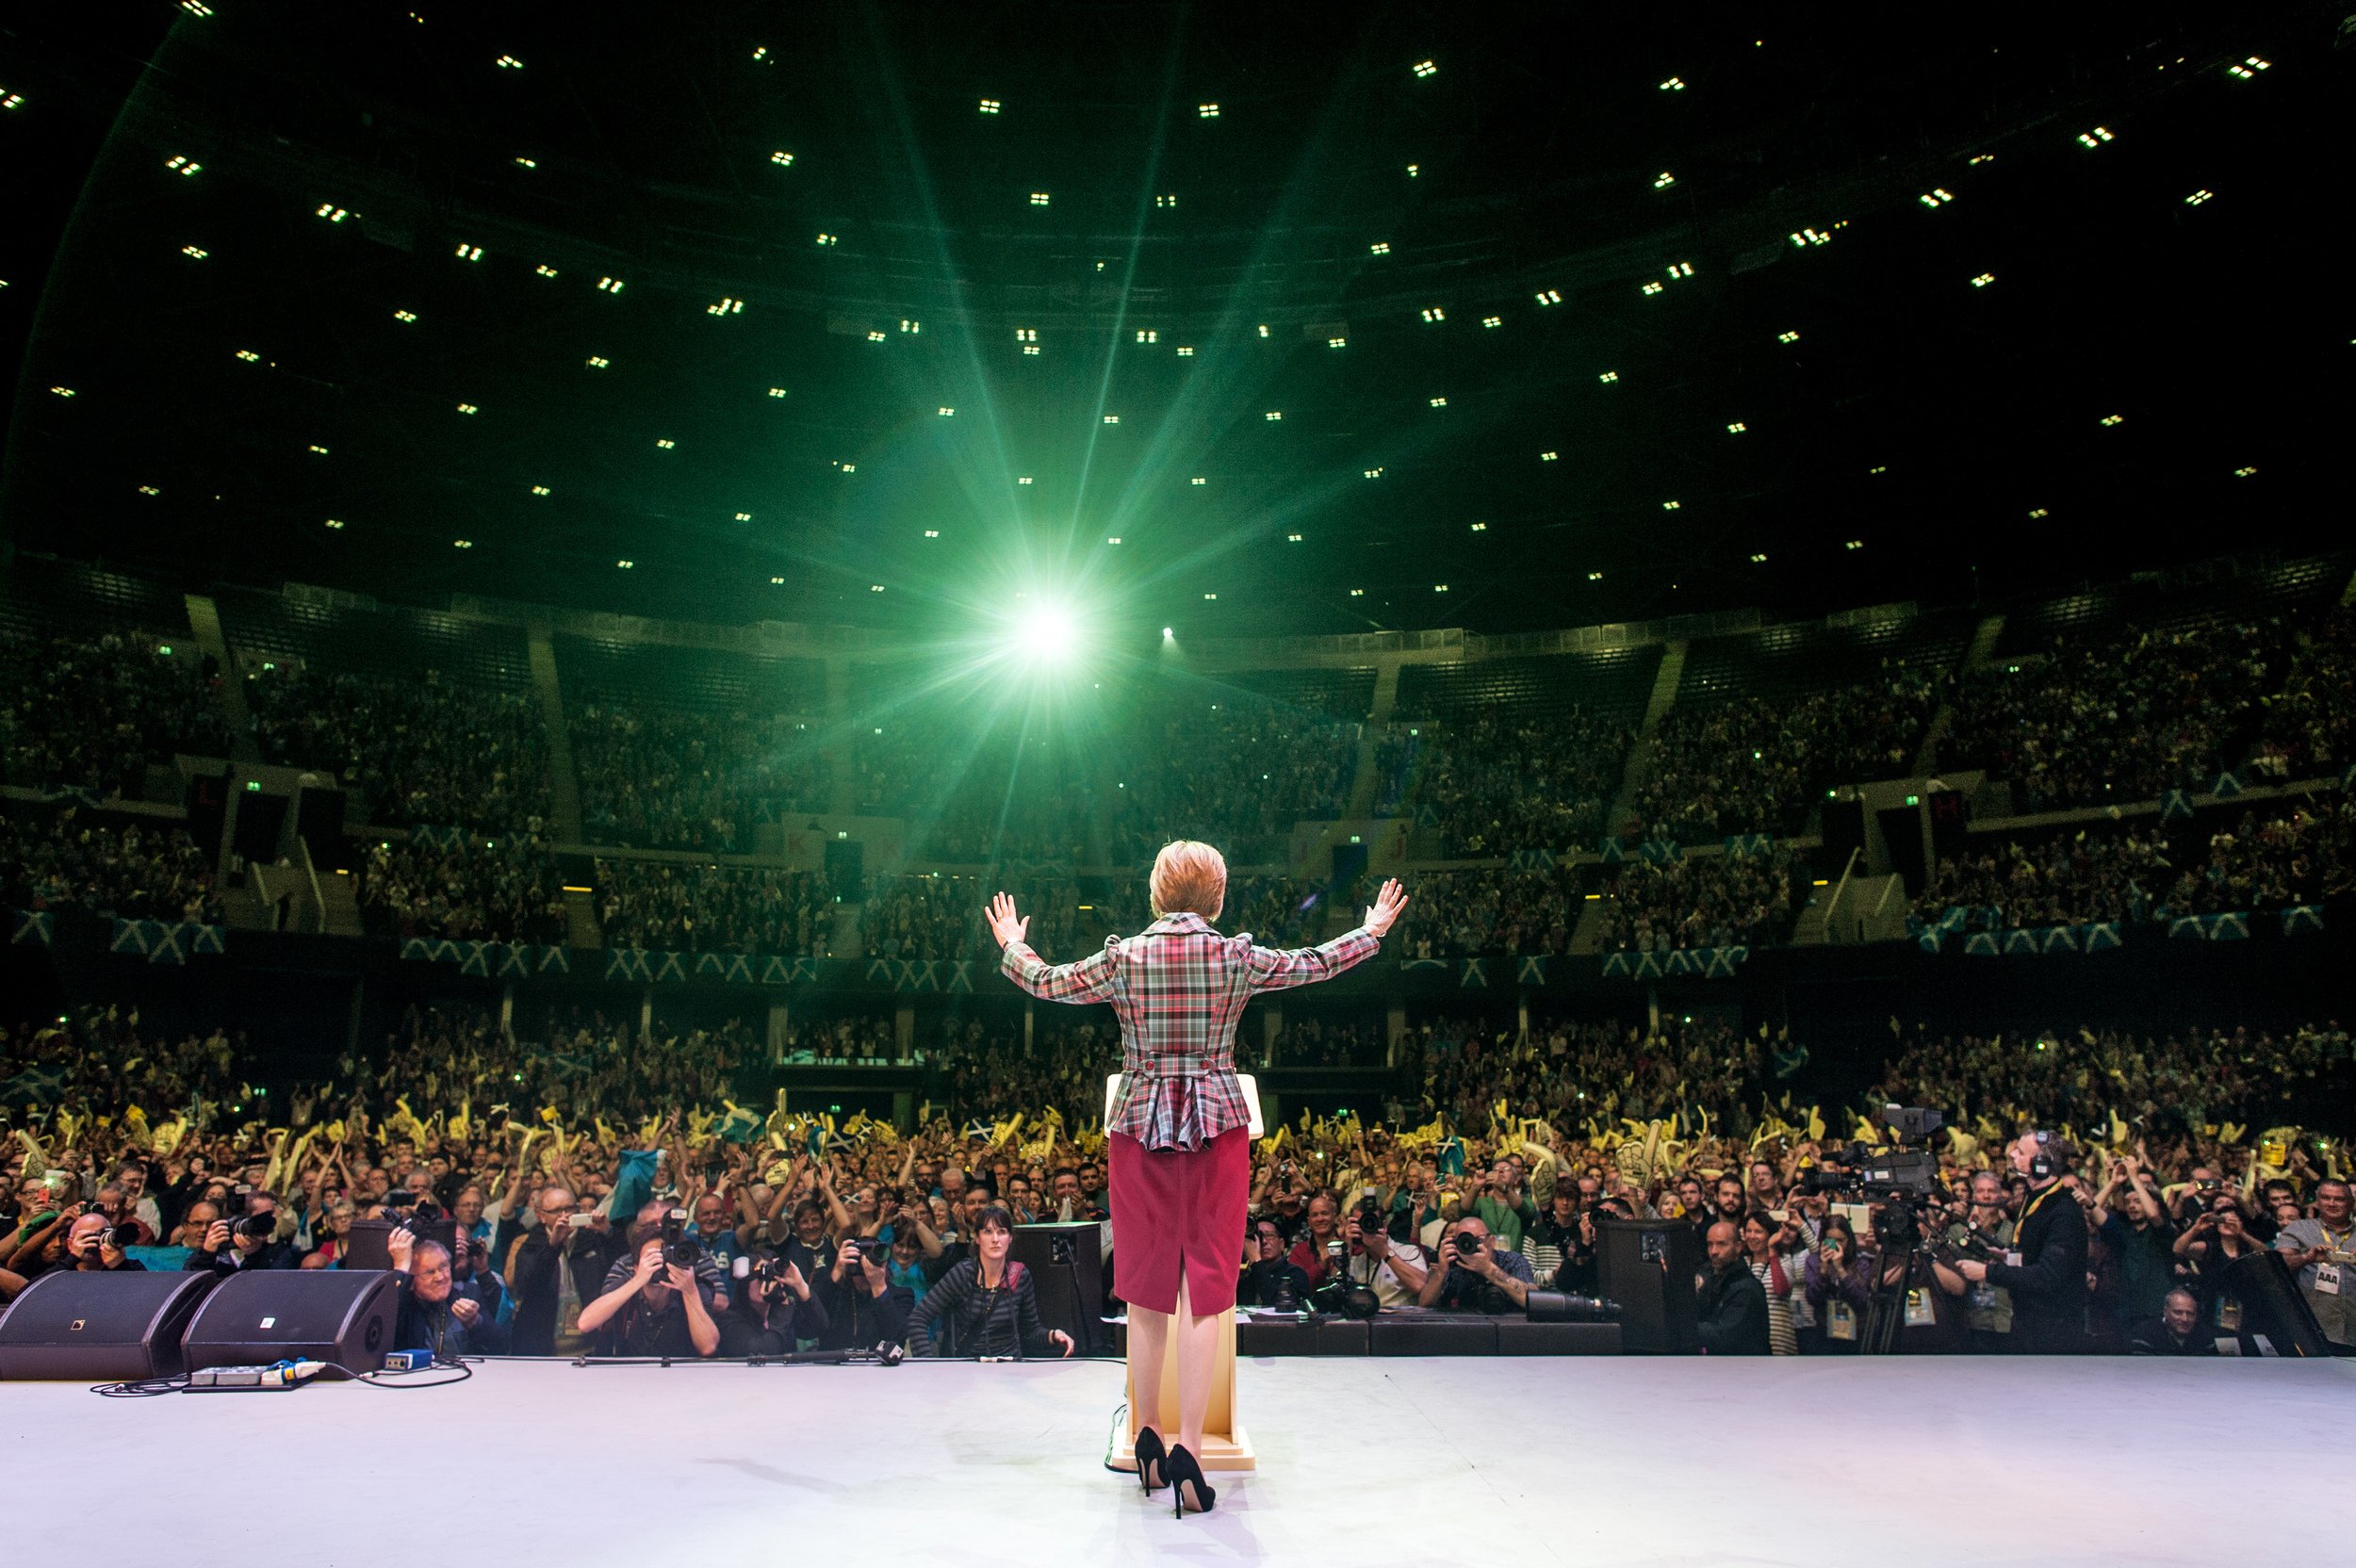  Nicola Sturgeon is welcomed on stage with a standing ovation at Glasgow's Hydro Arena during the SNP Tour 2014 